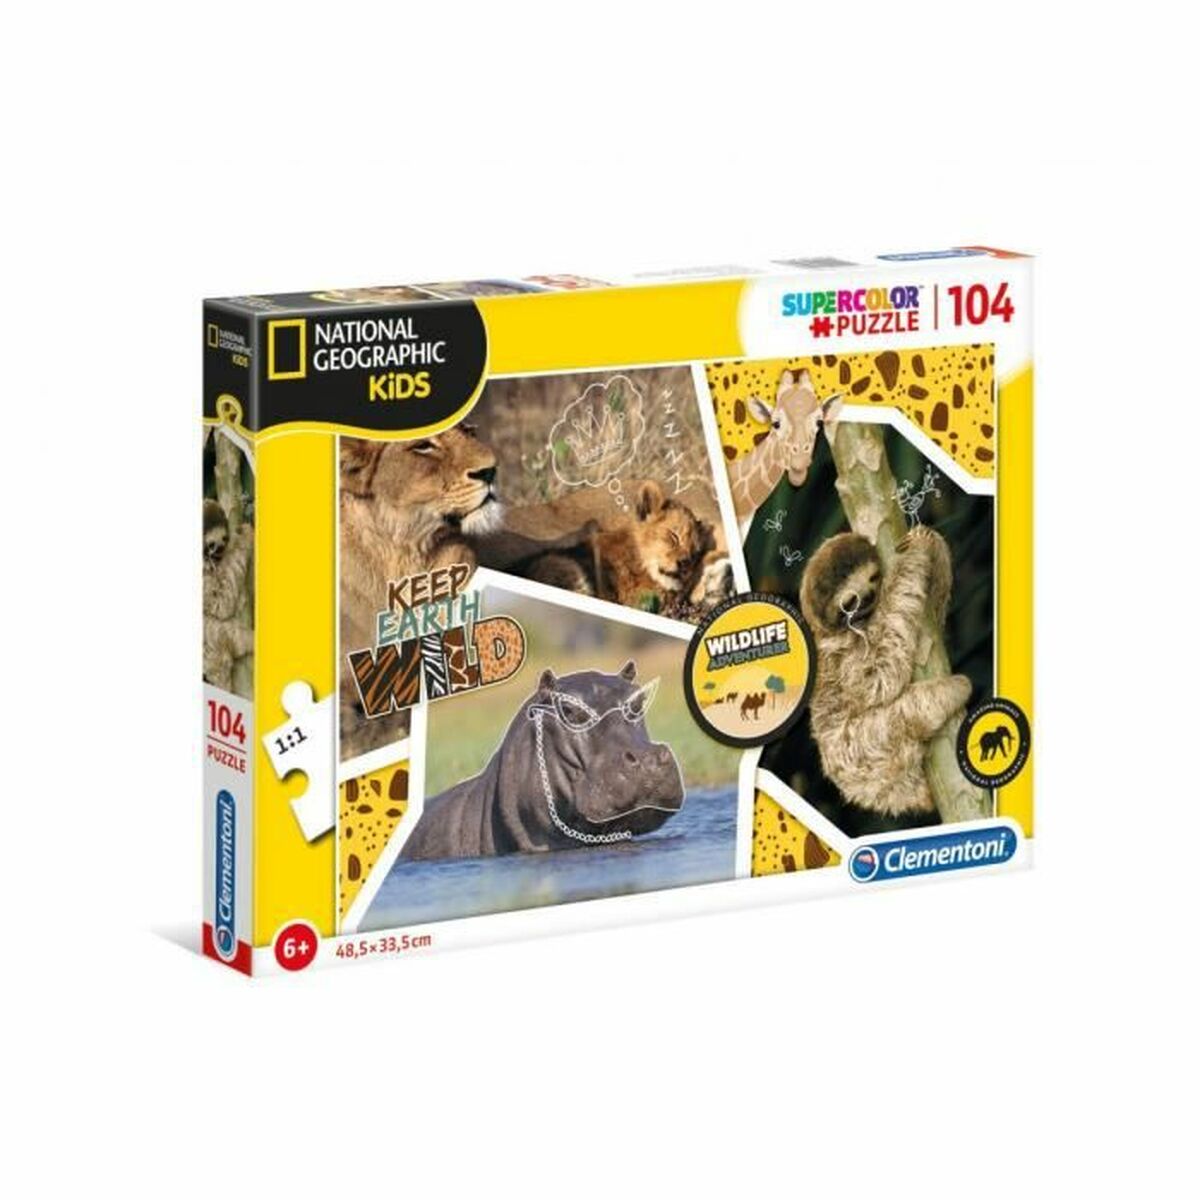 Puzzle Clementoni National Geographic Kids: Keep Earth Wild (104 Pièces)